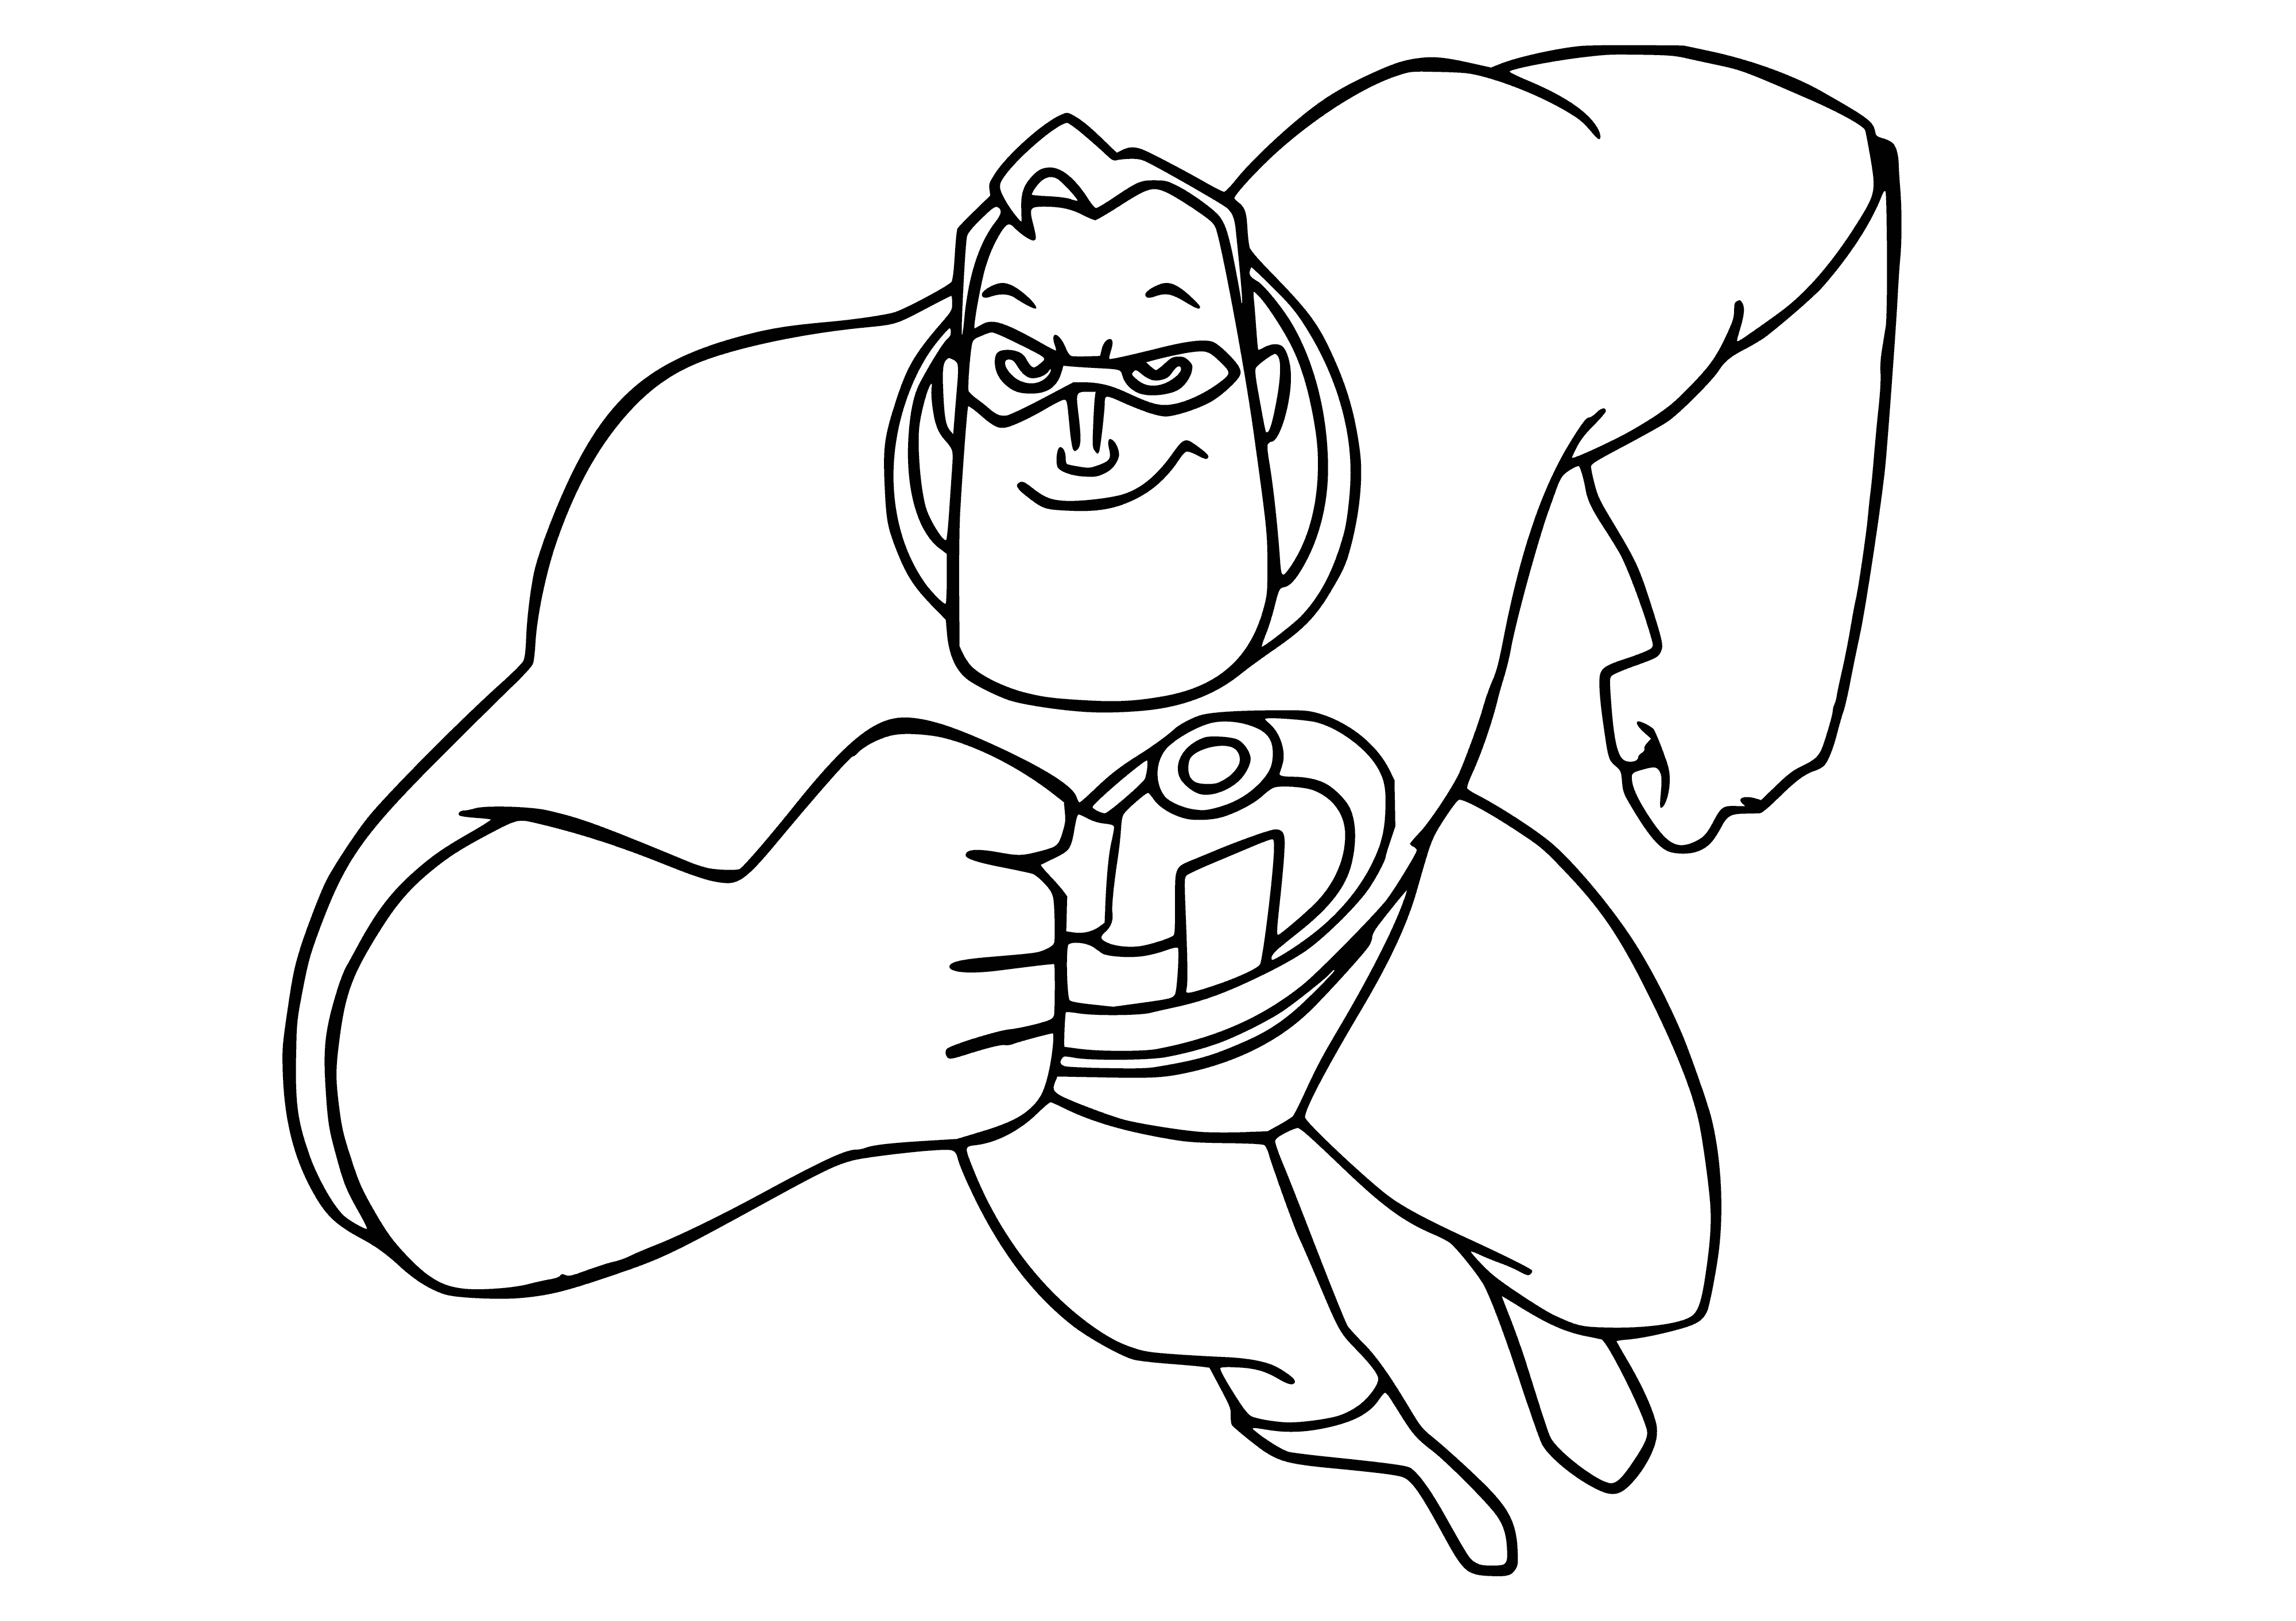 coloring page: Mister Incredible looks determined, wearing a black suit, red tie & displaying strong muscles - ready for any challenge.